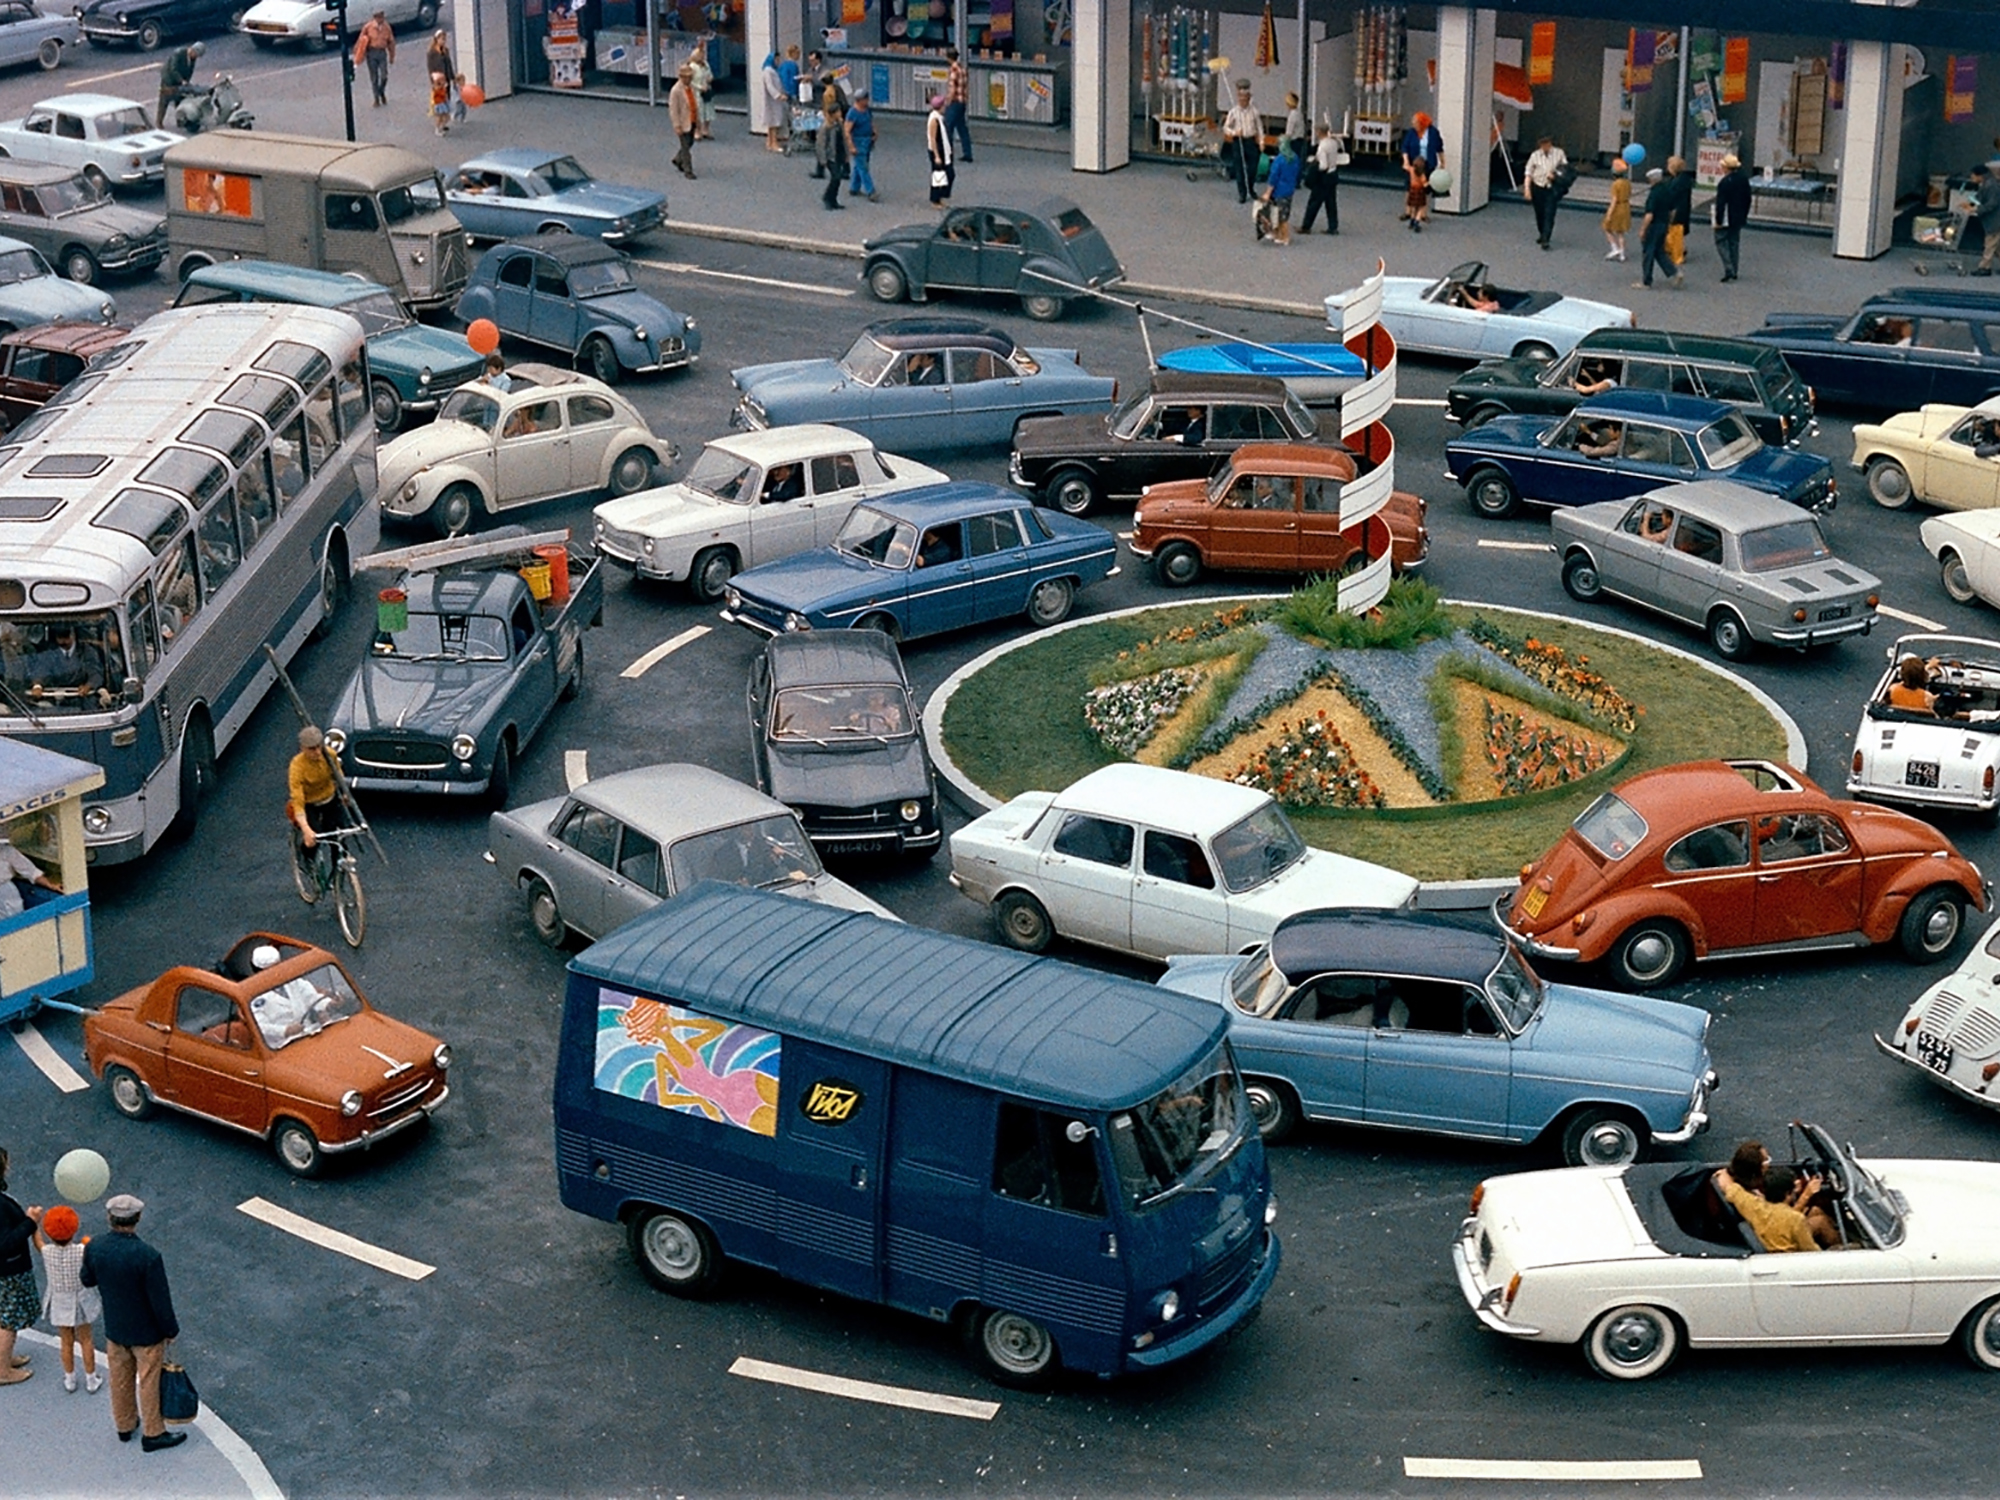 In praise of Jacques Tati’s Playtime2000 x 1500